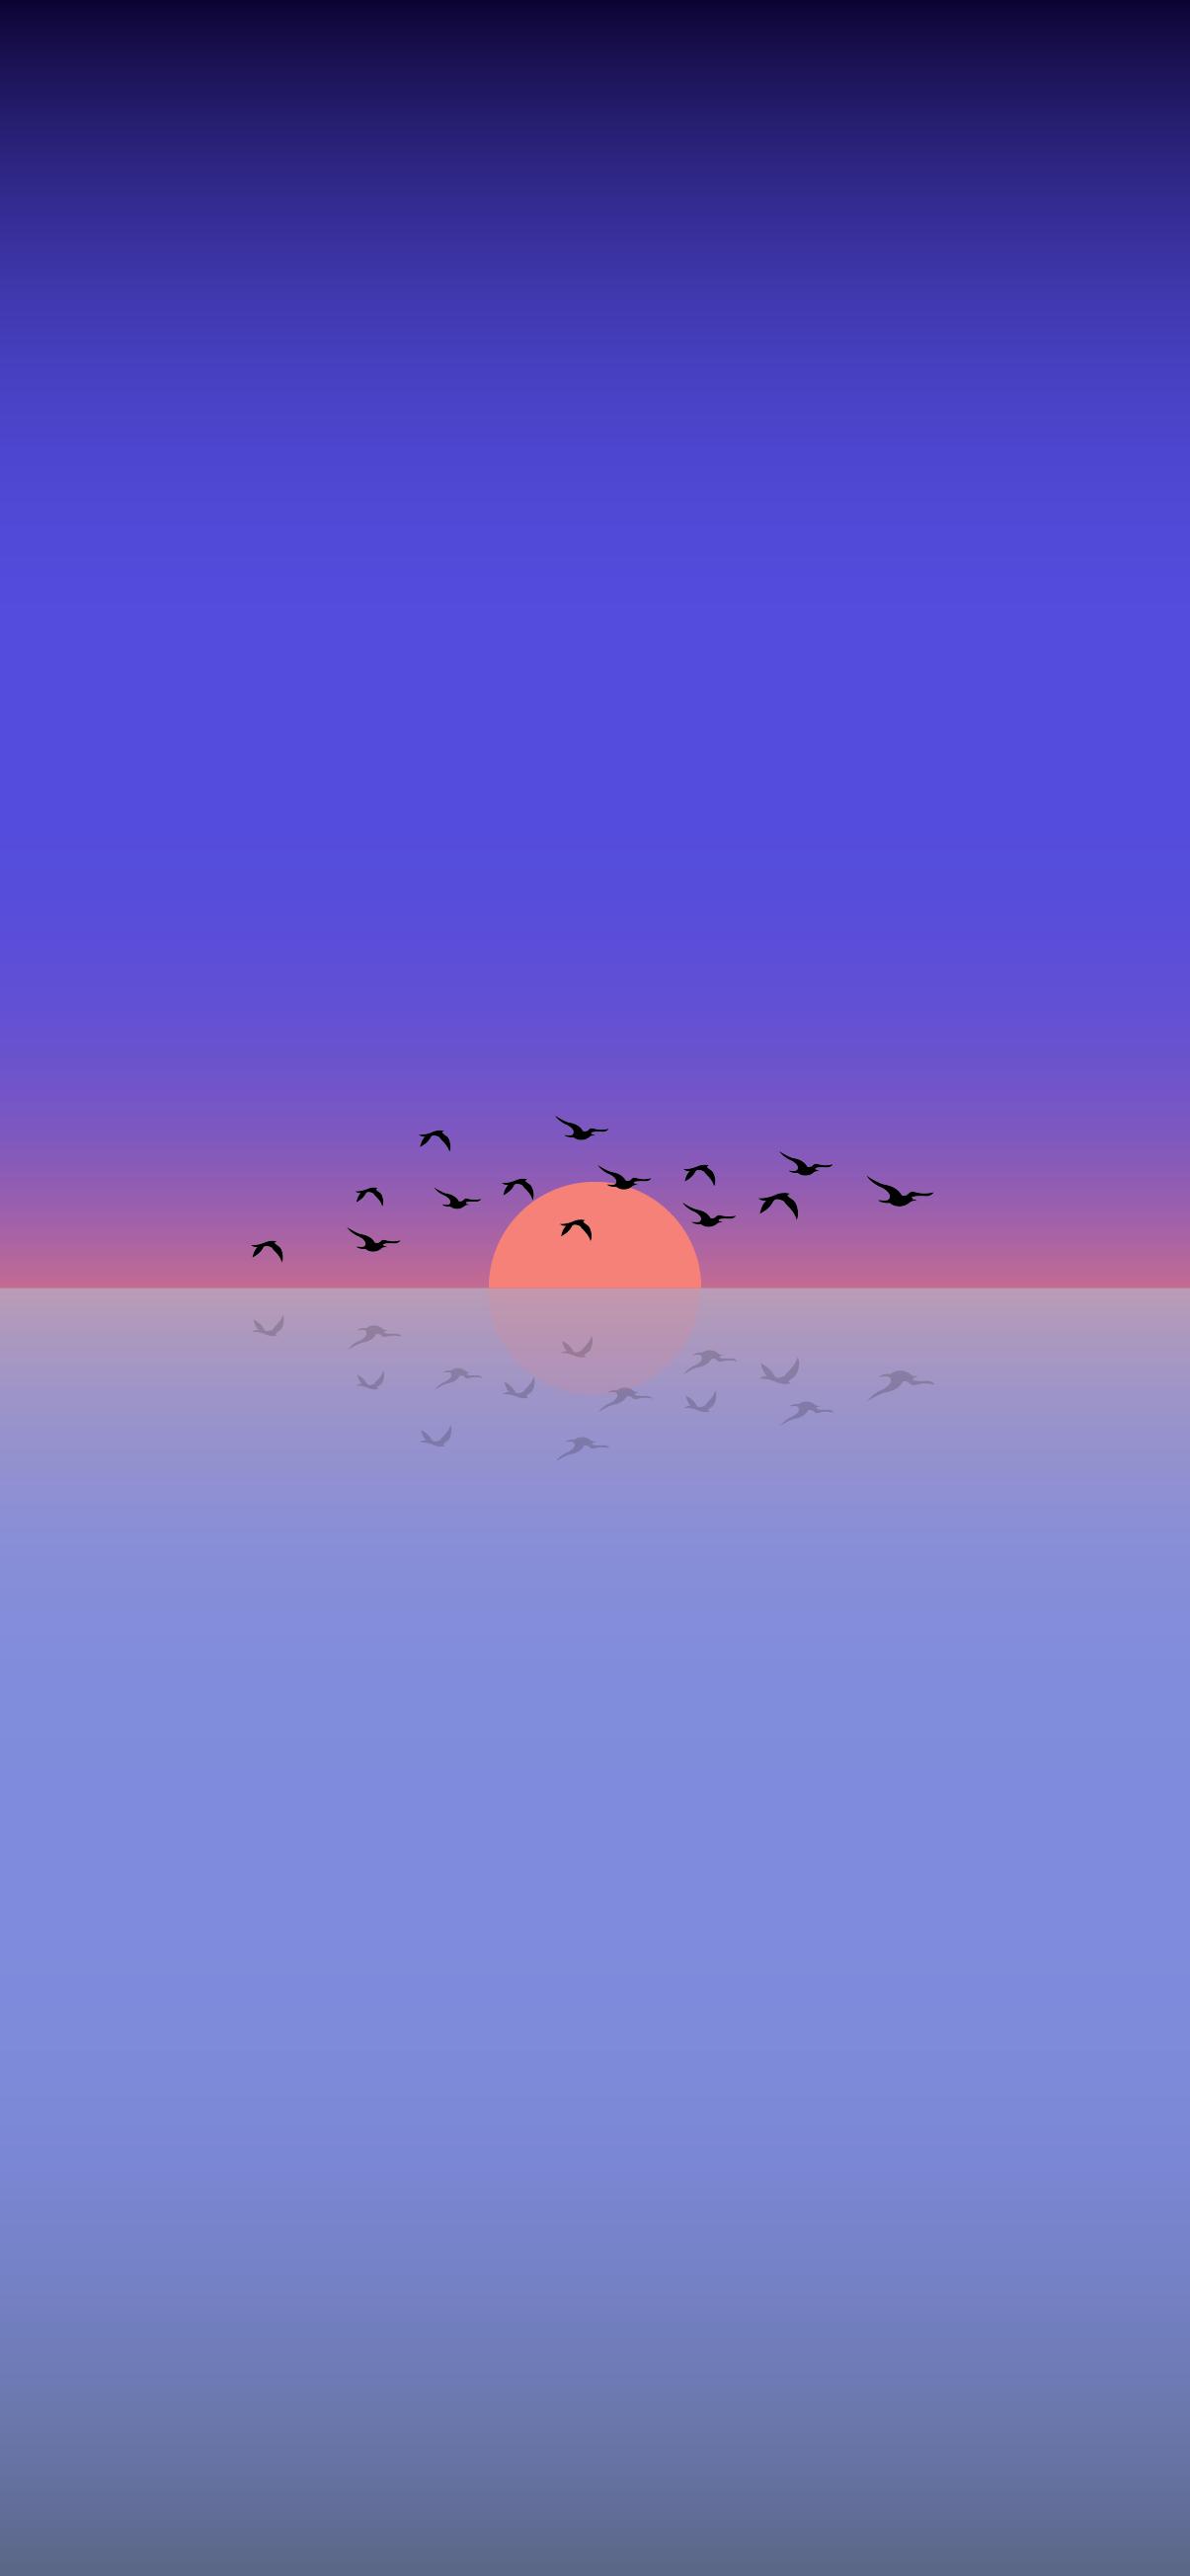 1205 x 2609 · png - Minimalist phone wallpapers - Sunset and birds flying